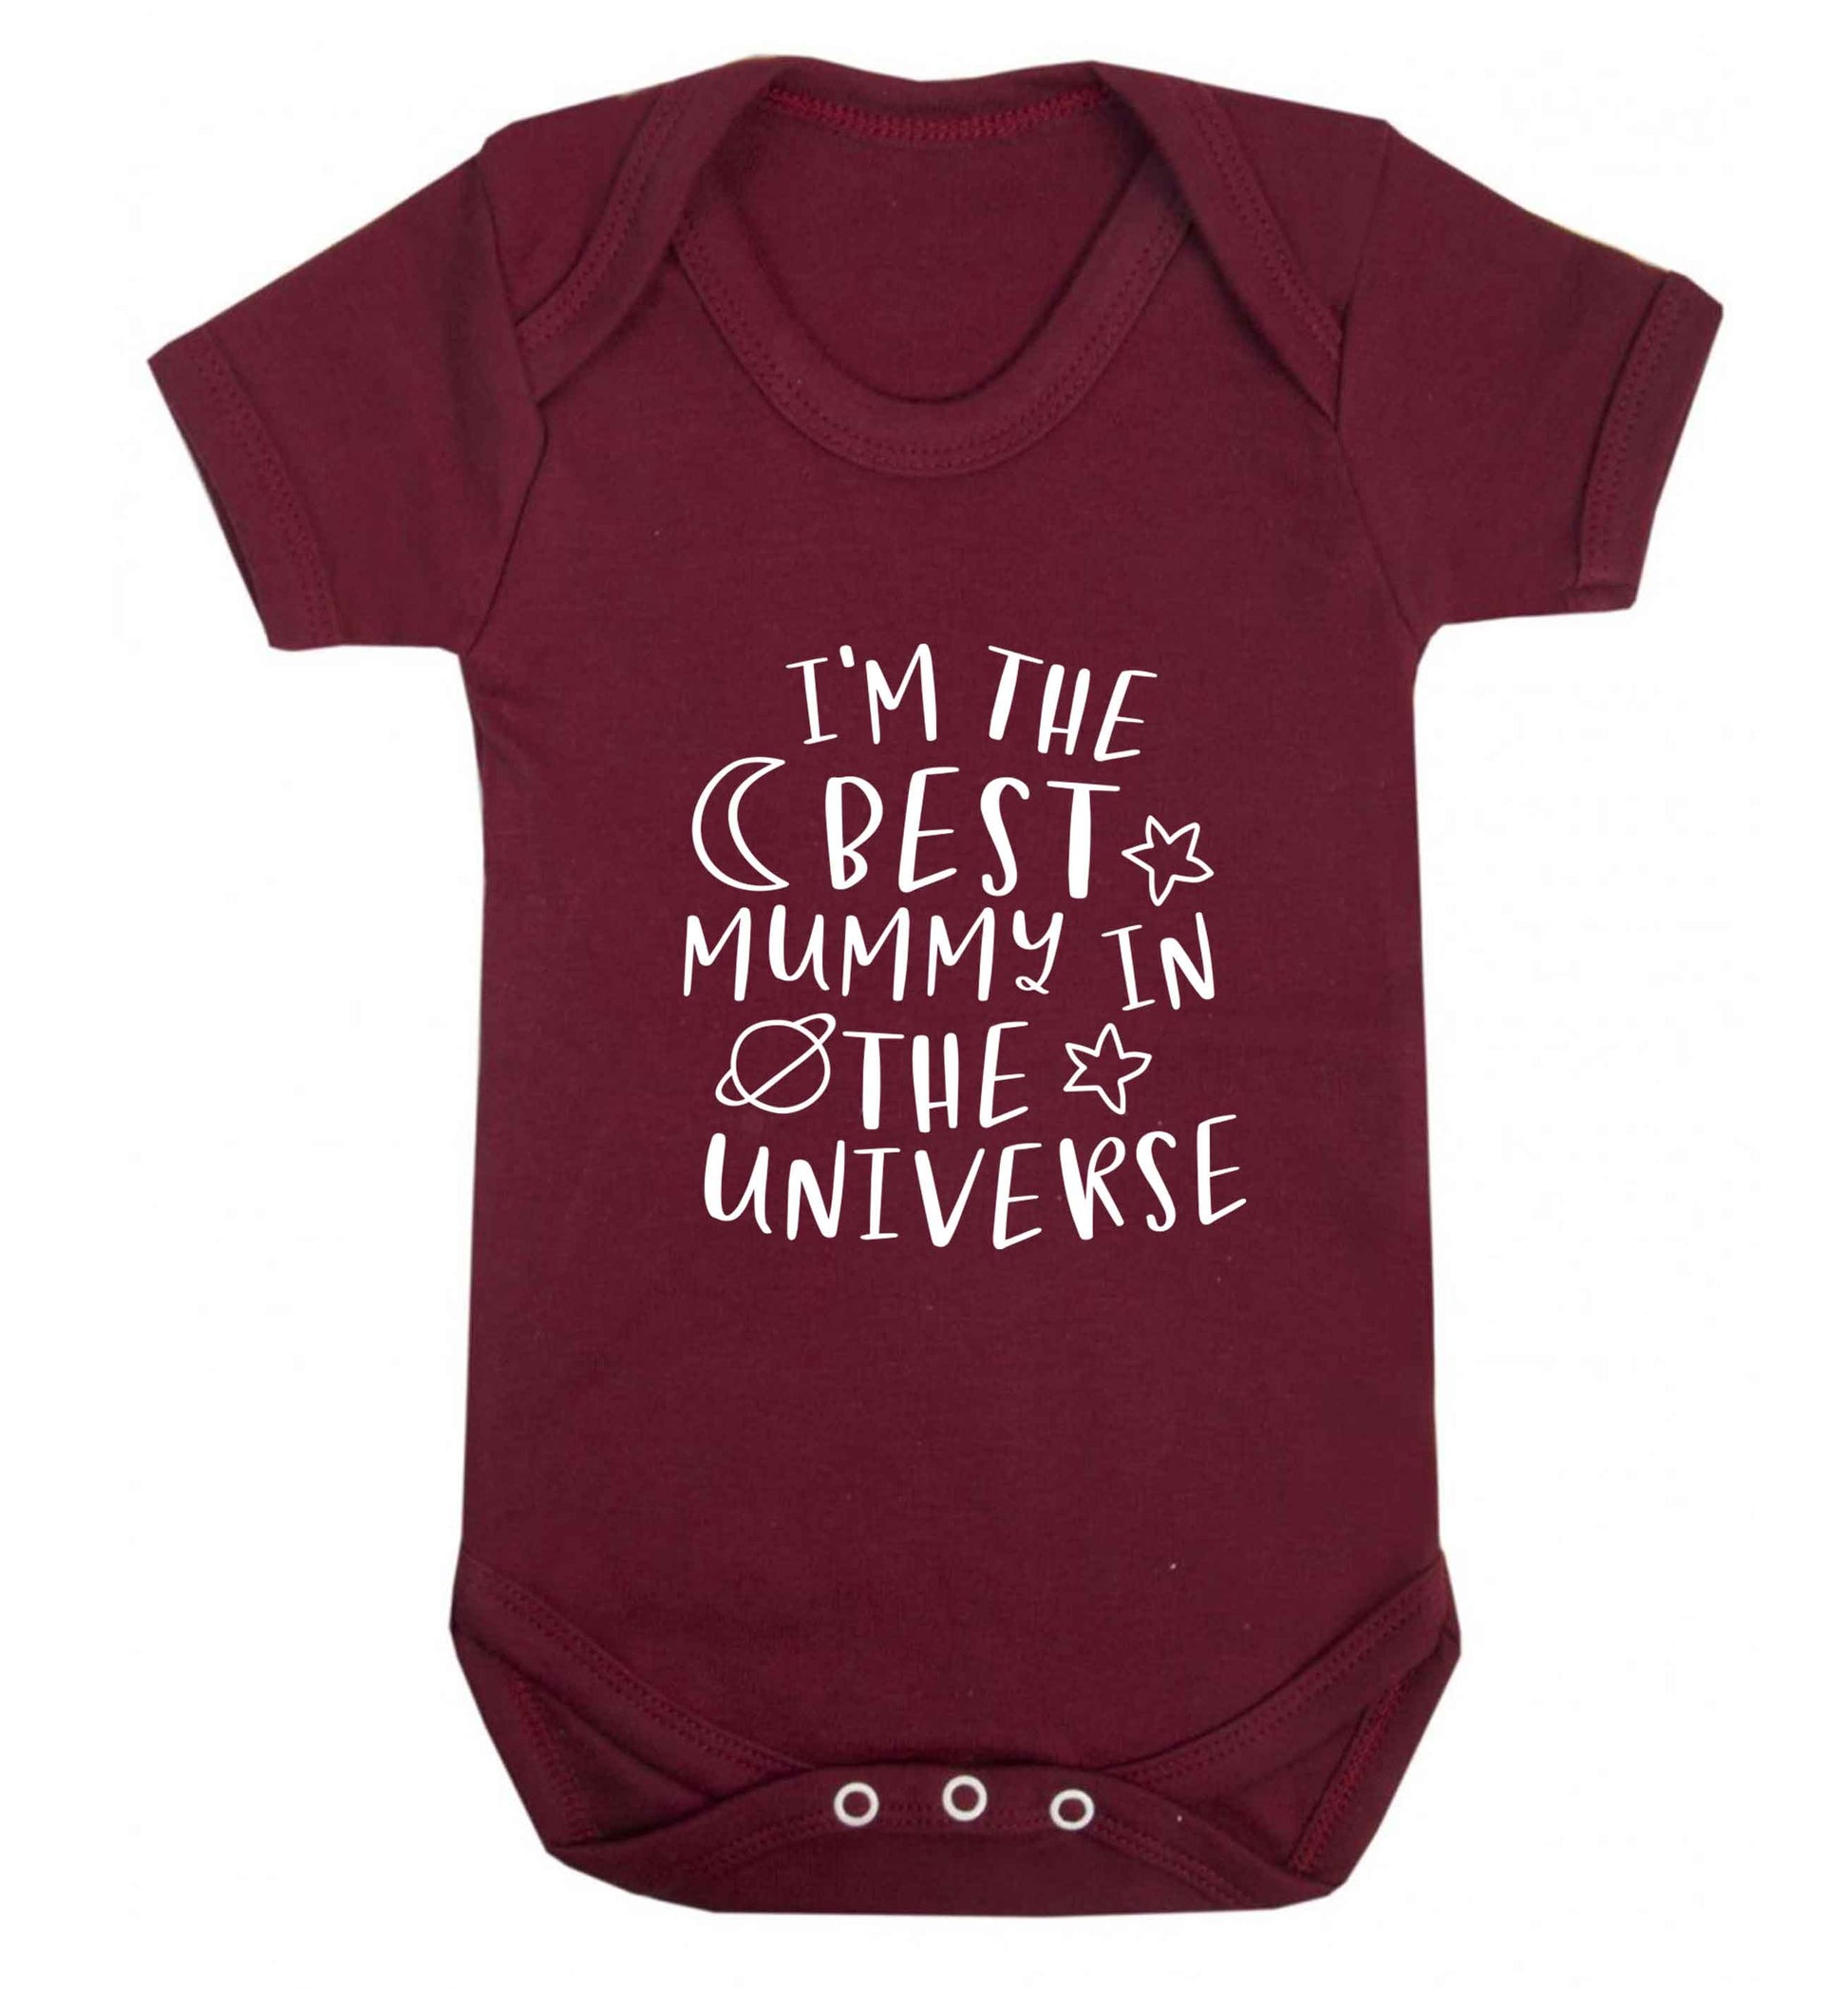 I'm the best mummy in the universe baby vest maroon 18-24 months